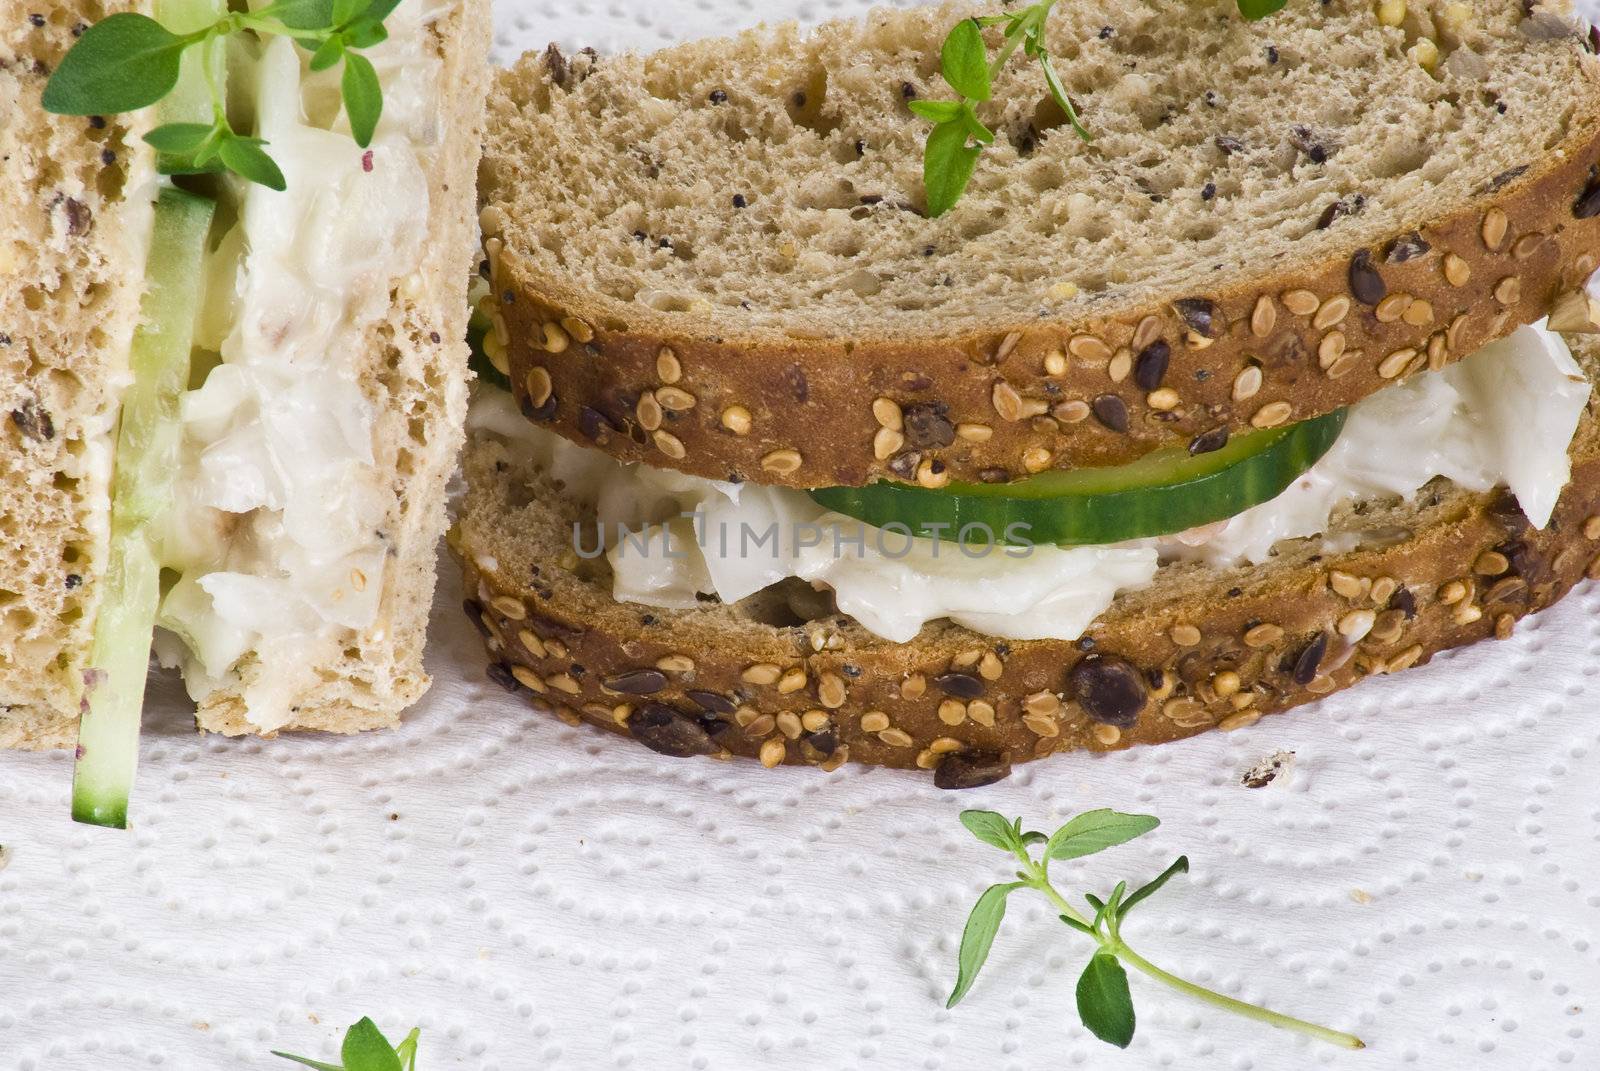 Cucumber and coleslaw sandwich with thyme leaves